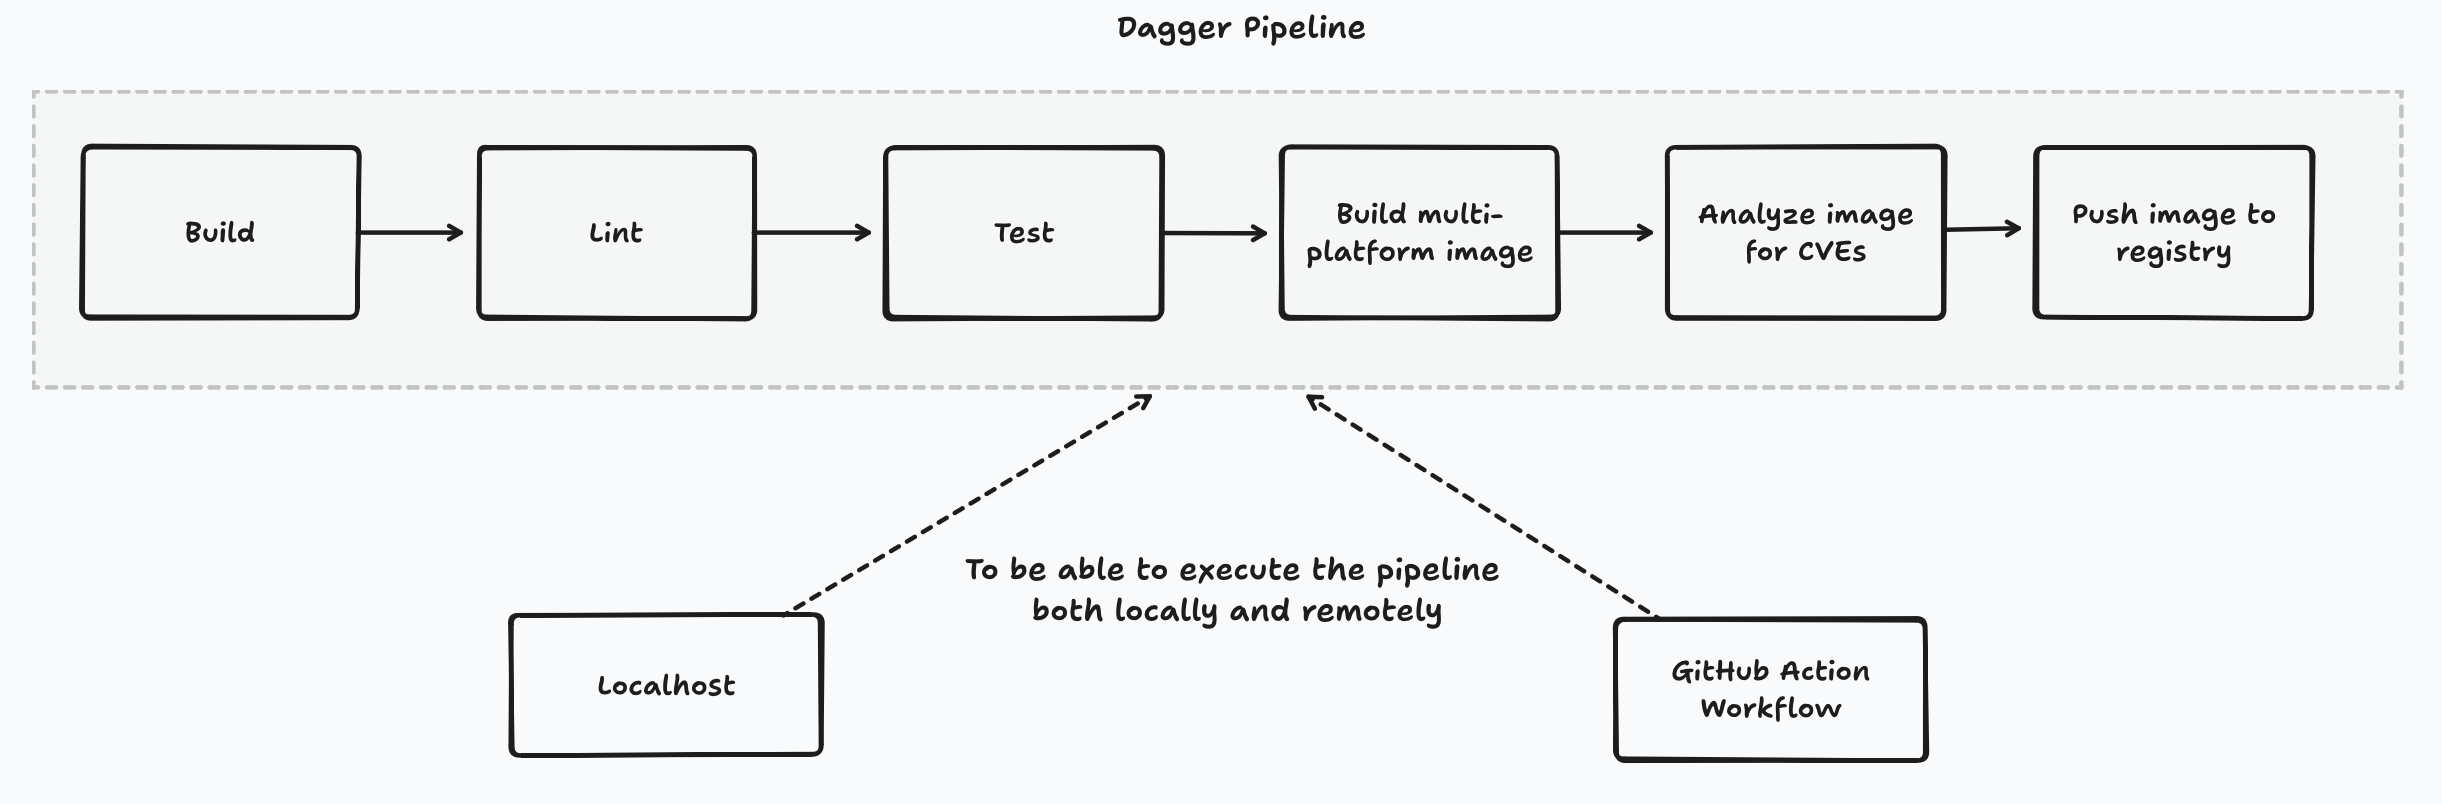 Building a Dagger Module to standardize the CI pipeline of my Go projects